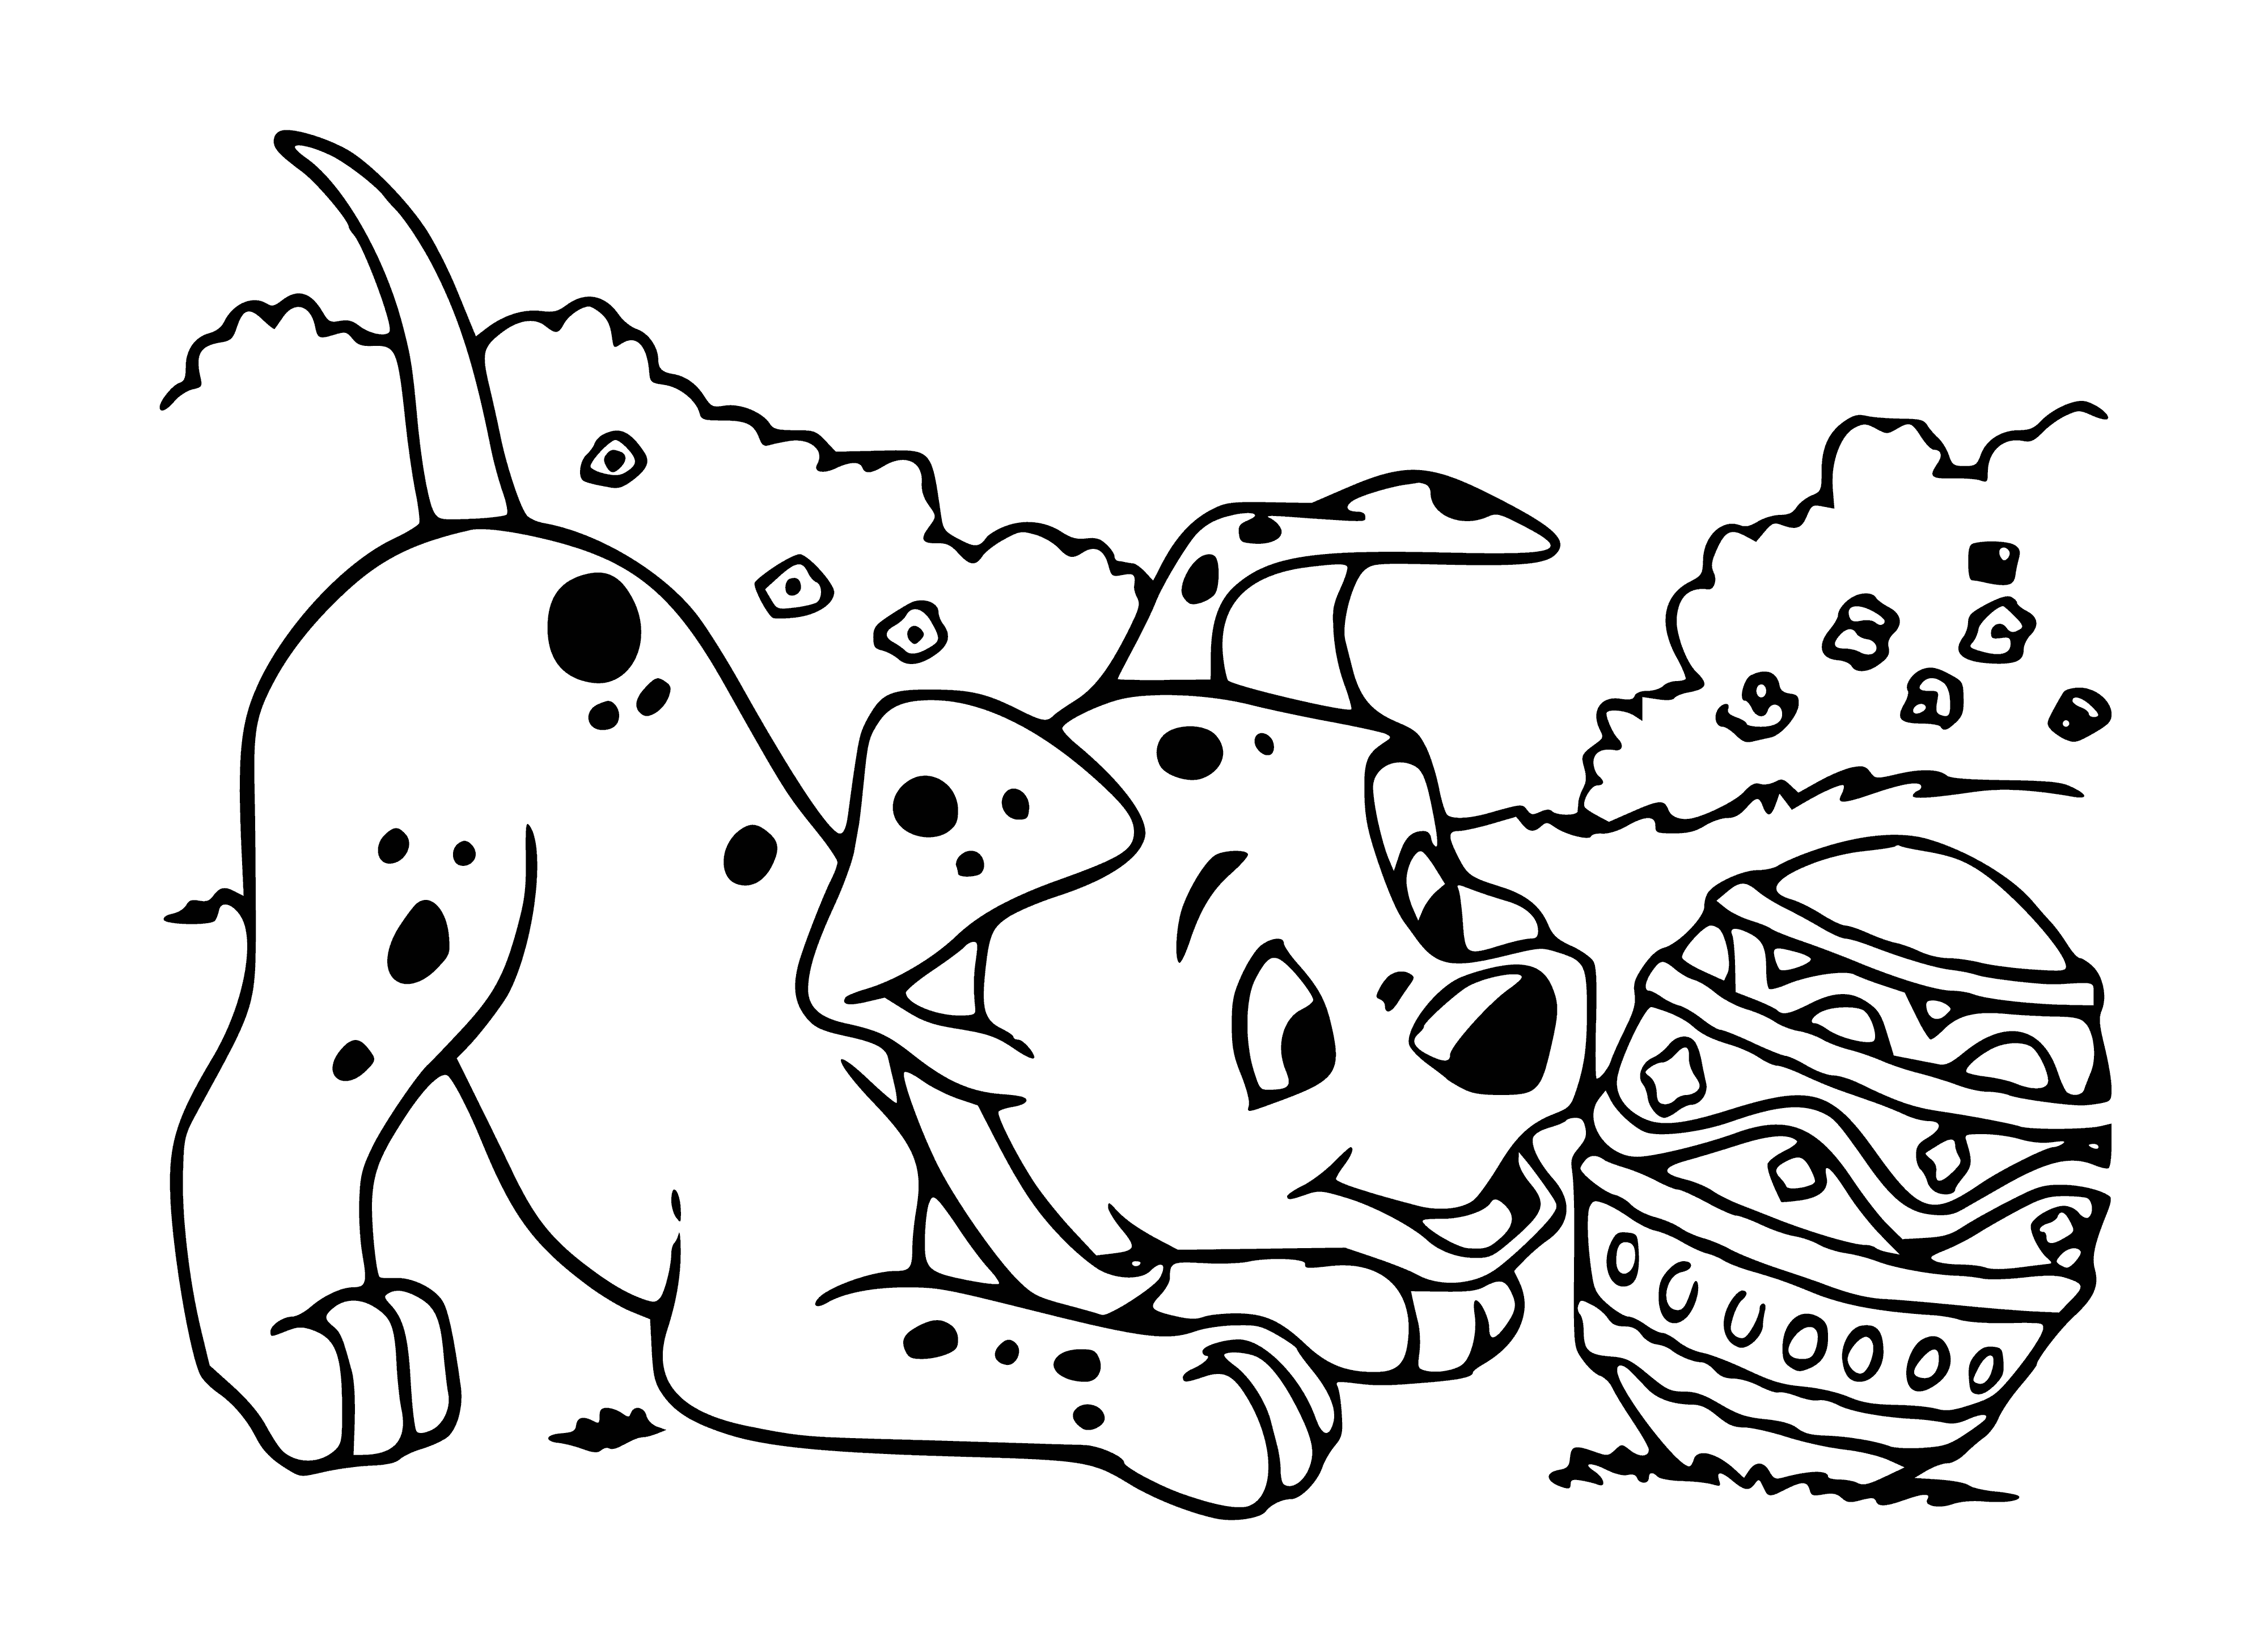 coloring page: A dalmatian in bunny ears holding an egg stands on grass, spotted all over. #easterdog